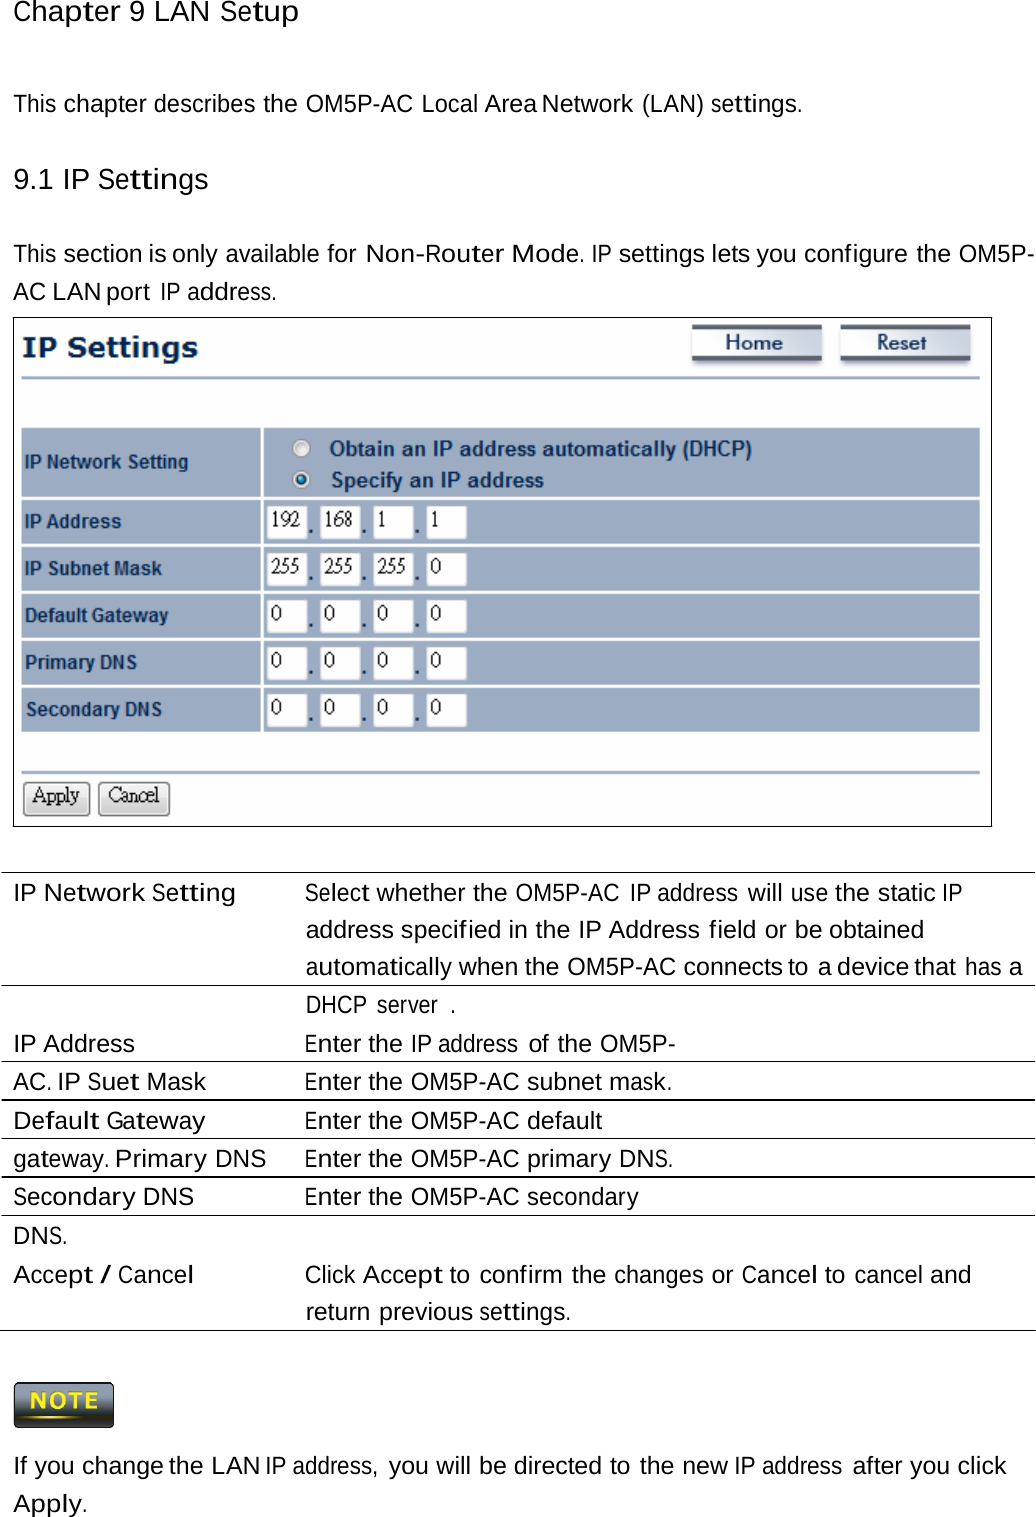 Chapter 9 LAN Setup This chapter describes the OM5P-AC Local Area Network (LAN) settings. 9.1 IP Settings This section is only available for Non-Router Mode. IP settings lets you configure the OM5P-AC LAN port IP address. IP Network Setting Select whether the OM5P-AC IP address will use the static IP address specif ied in the IP Address field or be obtained automatically when the OM5P-AC connects to  a device that has a DHCP server  . IP Address  Enter the IP address of the OM5P-AC. IP Suet Mask  Enter the OM5P-AC subnet mask. Default Gateway Enter the OM5P-AC default gateway. Primary DNS  Enter the OM5P-AC primary DNS. Secondary DNS  Enter the OM5P-AC secondary DNS. Accept / Cancel Click Accept to confirm the changes or Cancel to cancel and return previous settings.  If you change the LAN IP address, you will be directed to the new IP address after you click Apply. 